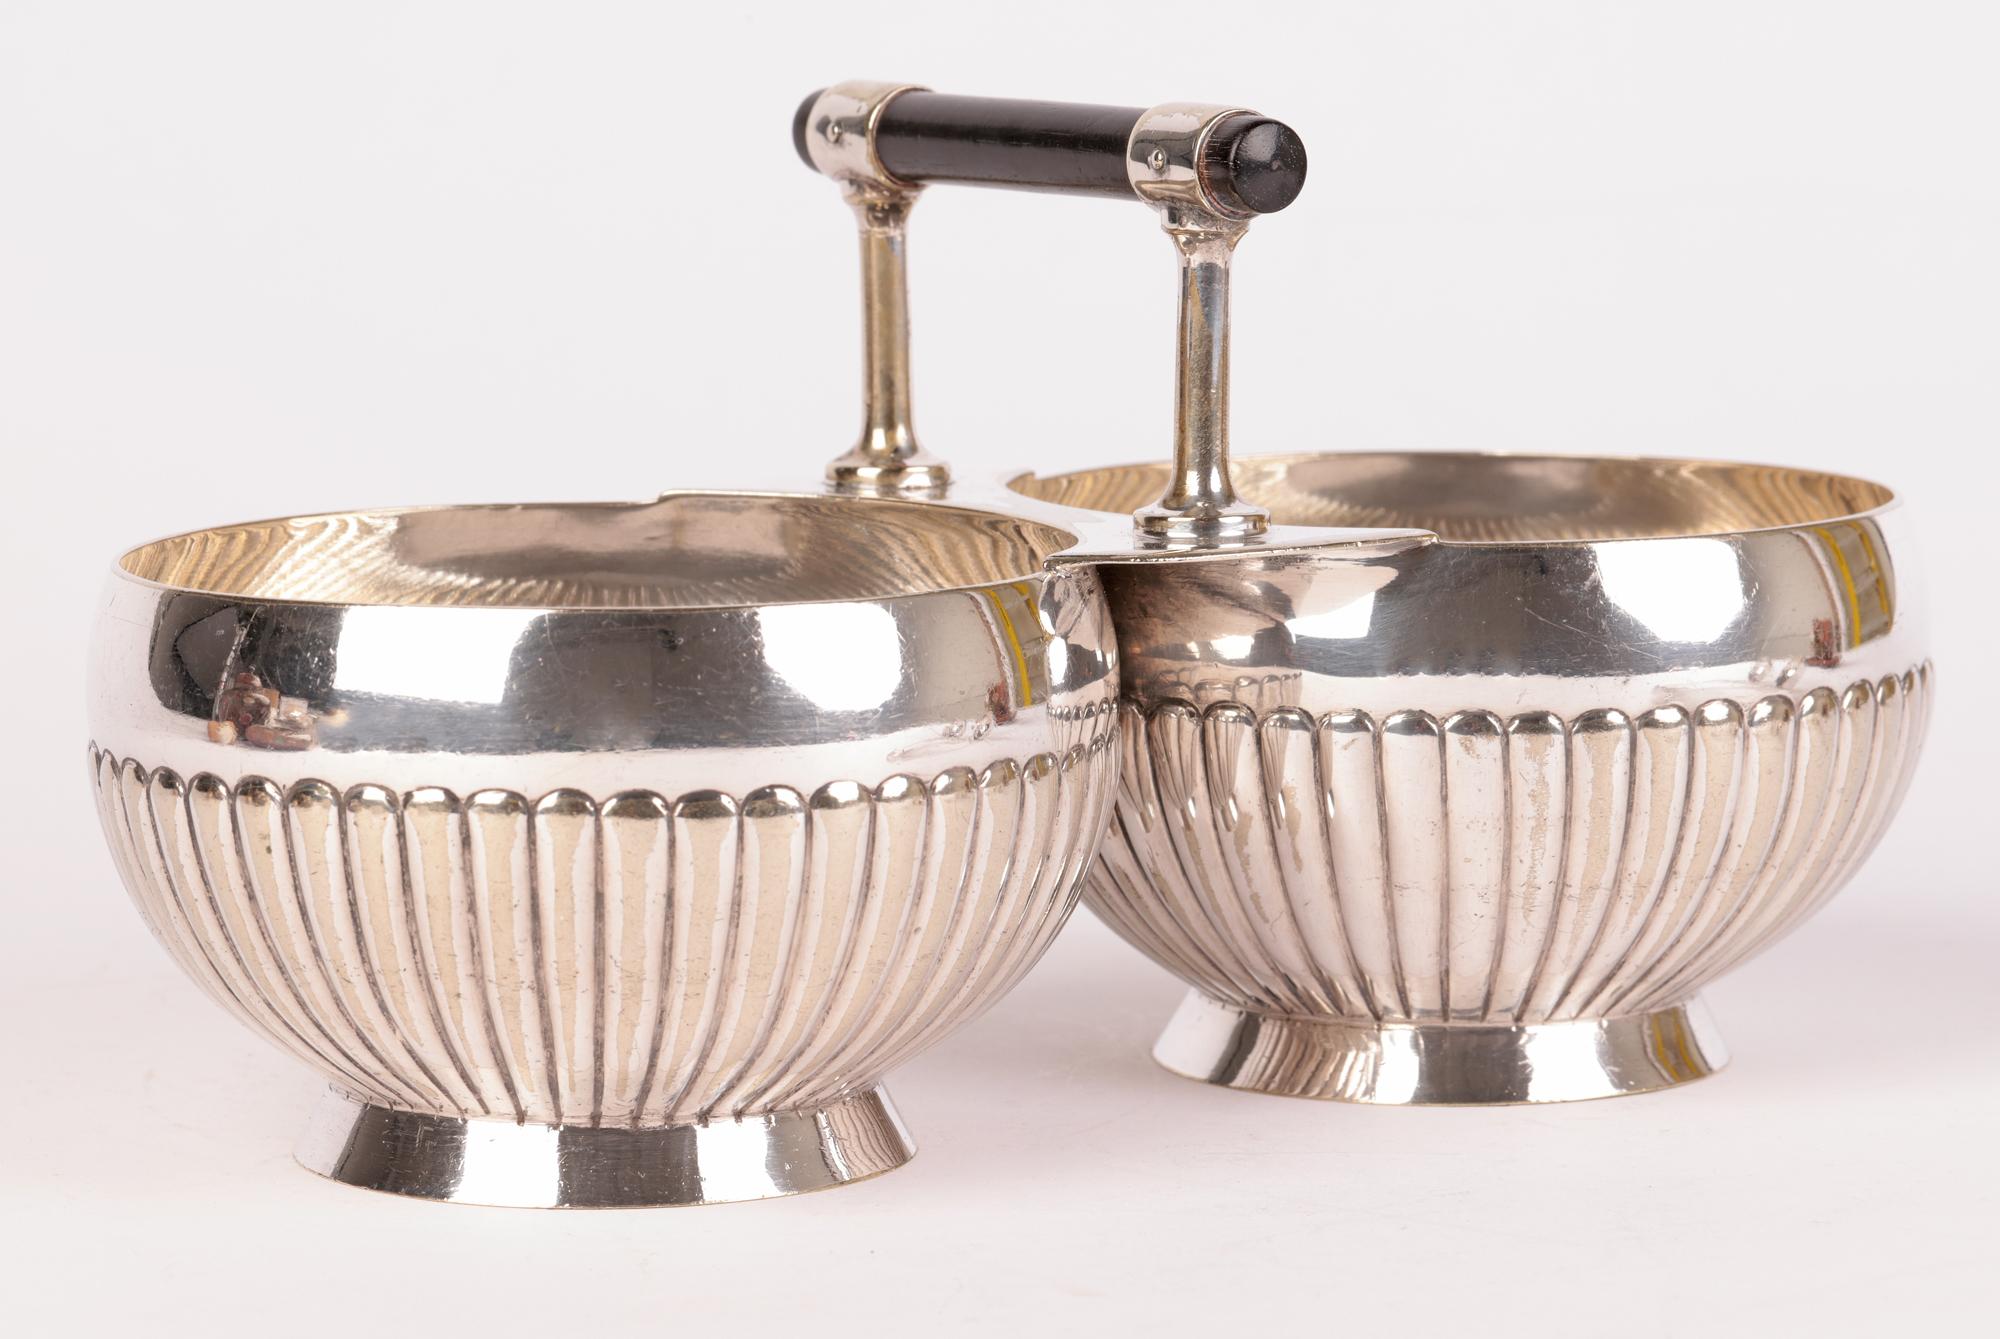 A very stylish Arts & Crafts Hukin & Heath twin silver plated sugar bowl and matching ladles designed by Christopher Dresser and dating from around 1890. The two bowls are of round shape supported on flared bases and joined with a flat edge mounted